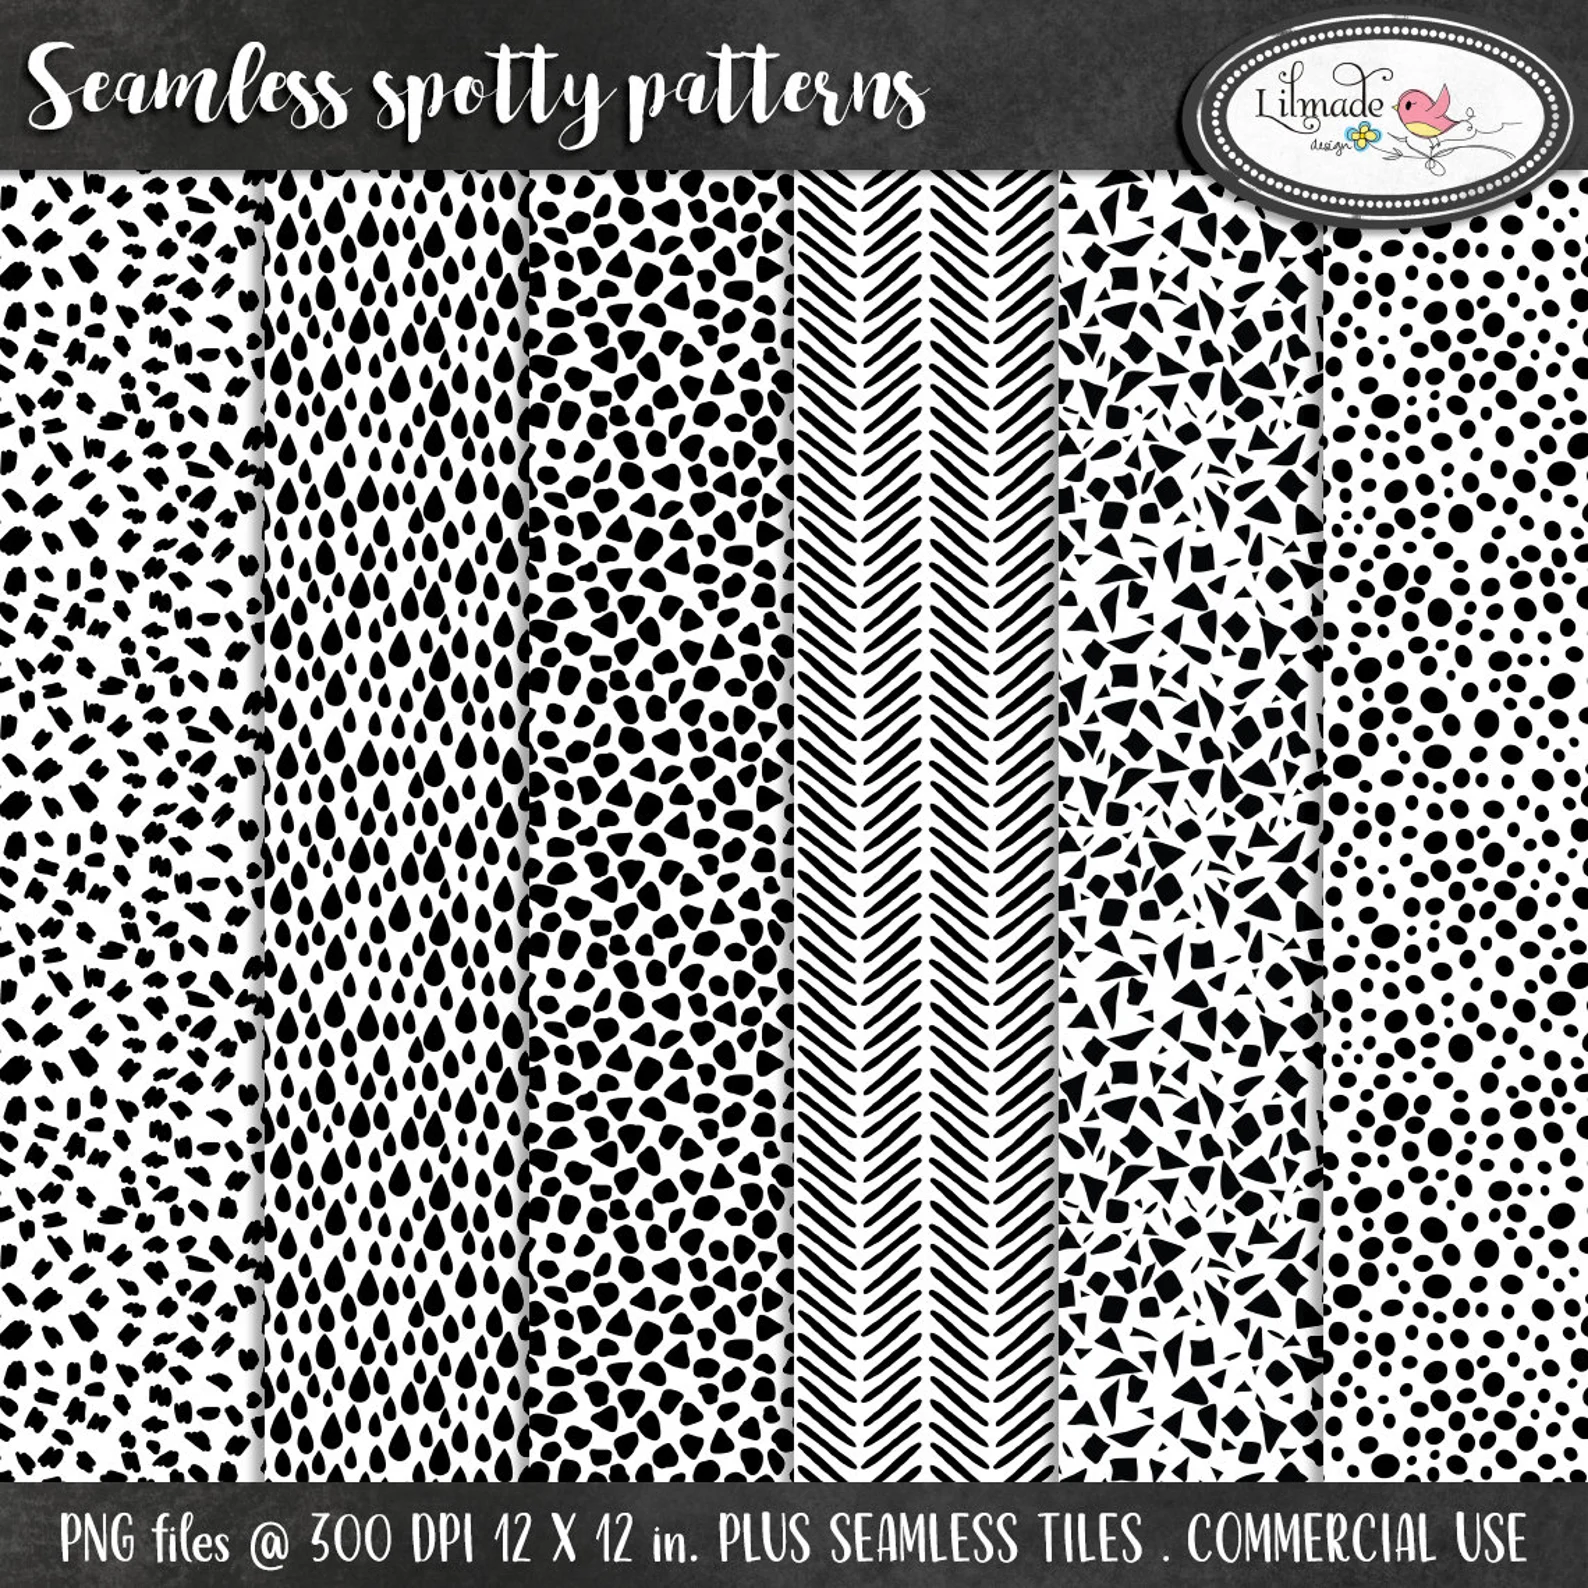 Seamless-spotty-and-terrazo-patterns for-commercial-use